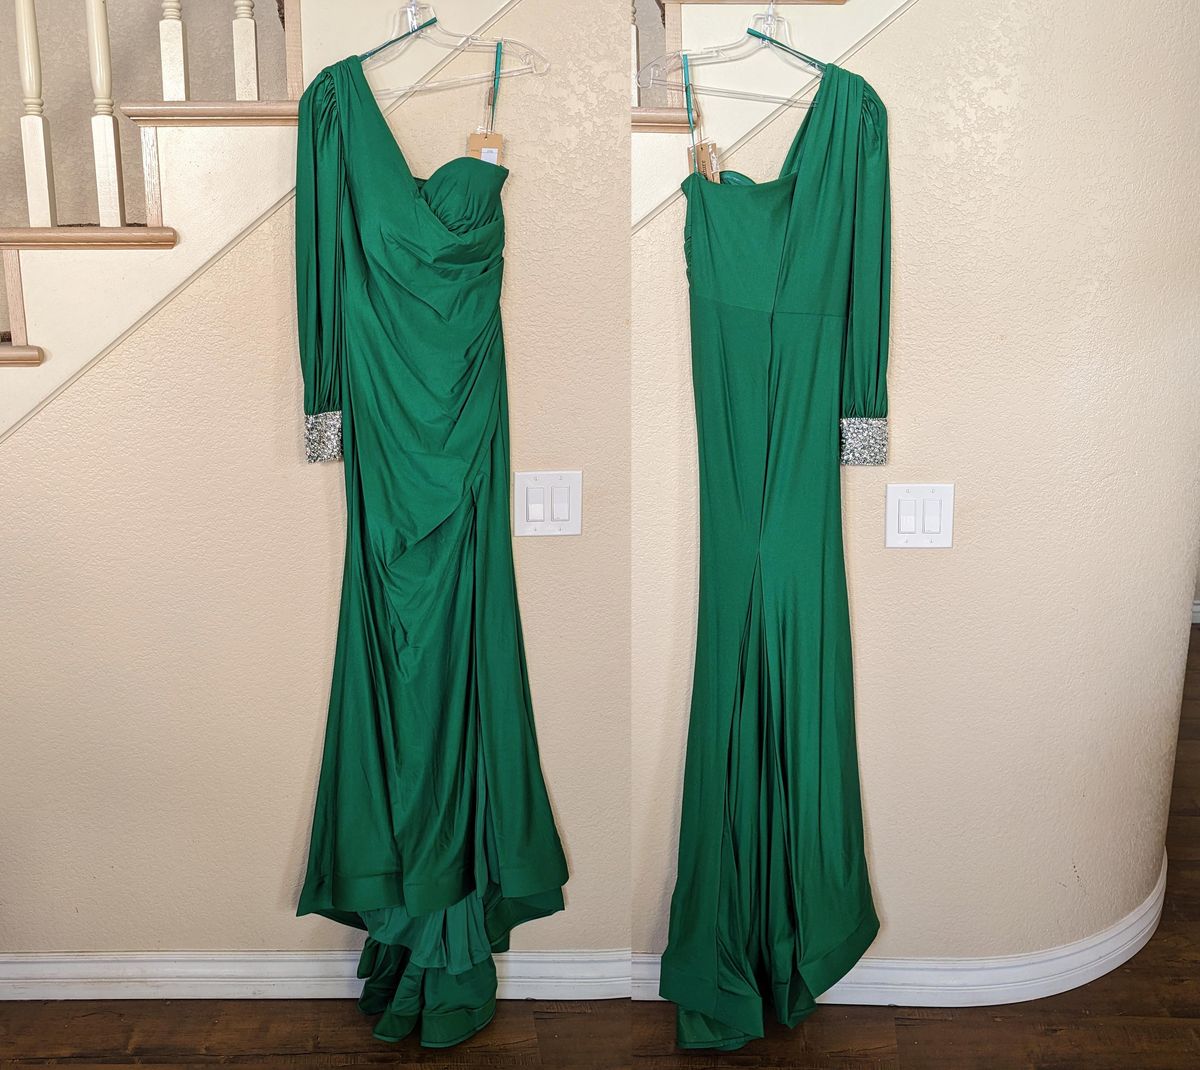 Style Emerald Green One Shoulder Formal Mermaid Prom Party Wedding Guest Dress 6 Size 6 Wedding Guest One Shoulder Sequined Green Mermaid Dress on Queenly